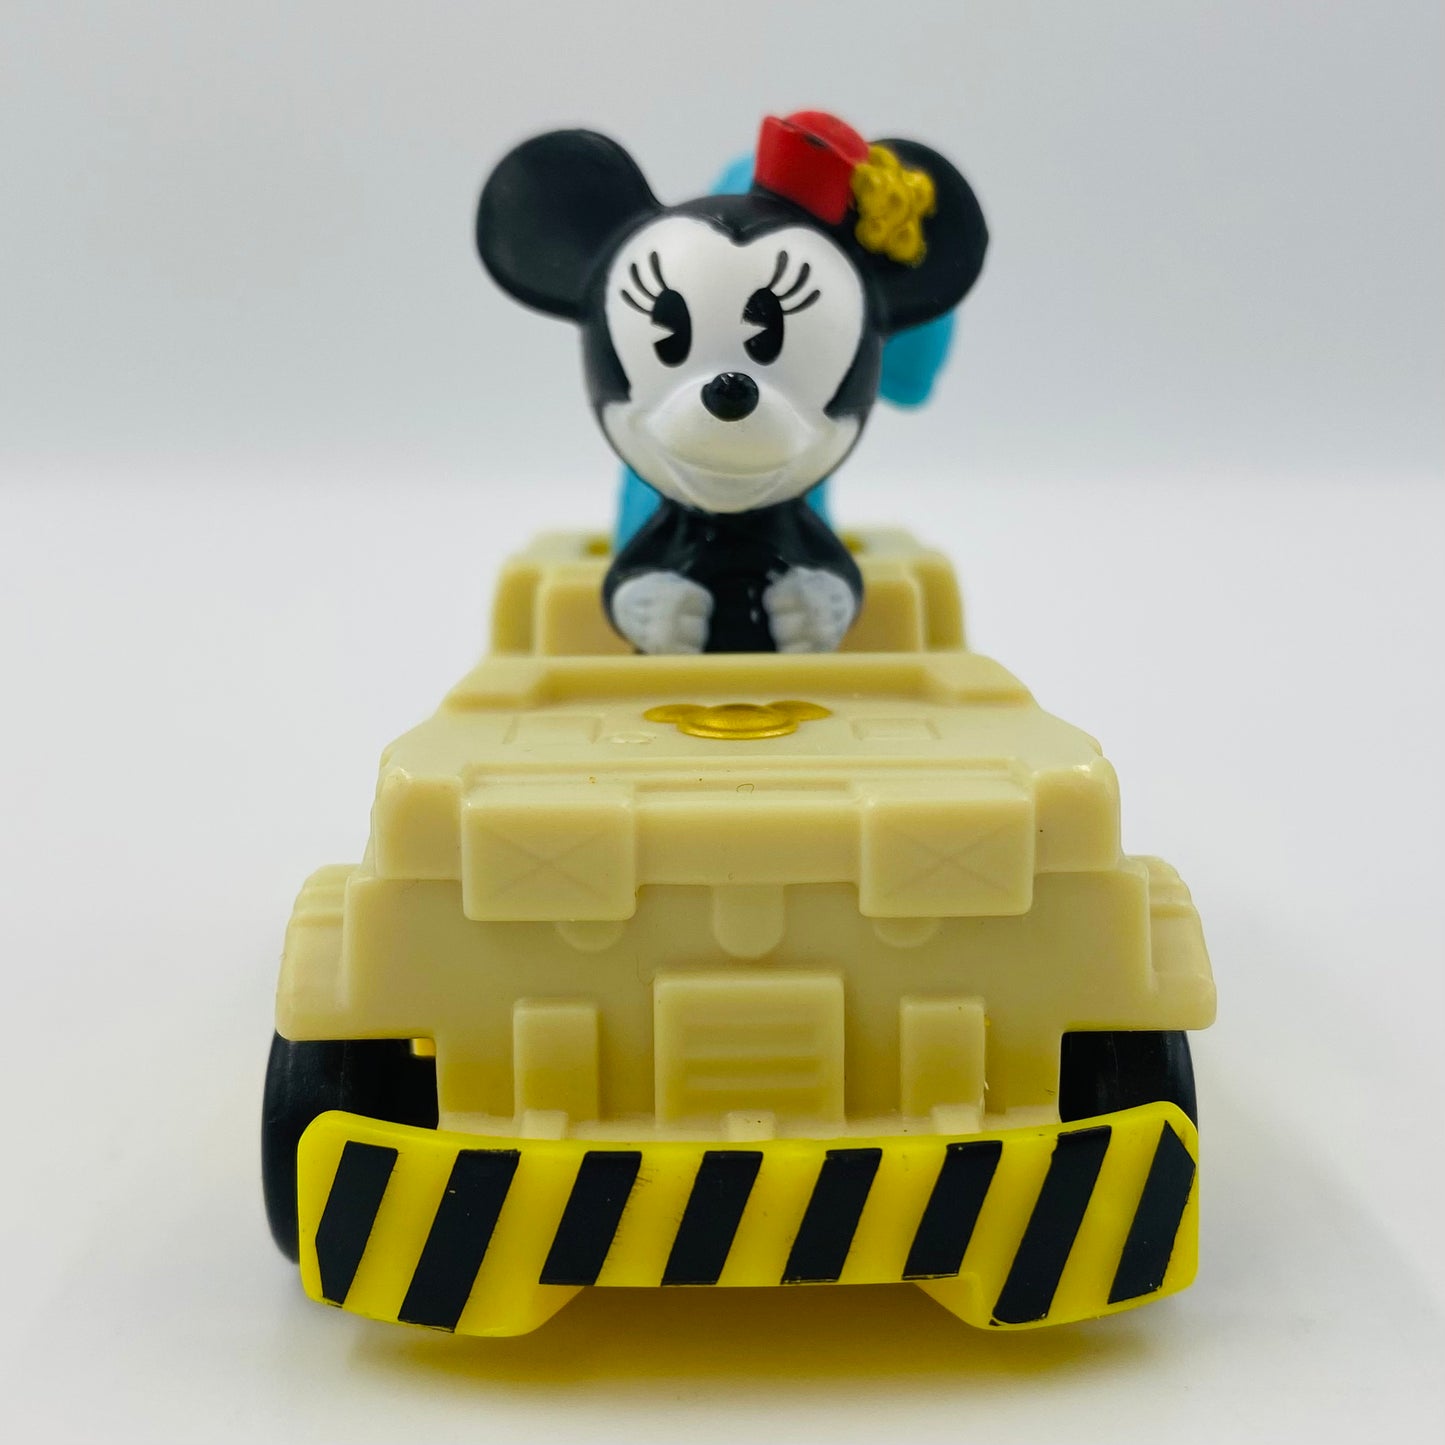 Walt Disney World’s 50th Anniversary Mickey & Minnie’s Runaway Railroad Minnie Mouse at the Dinosaur Attraction McDonald's Happy Meal toy car (2020 & 2022) loose